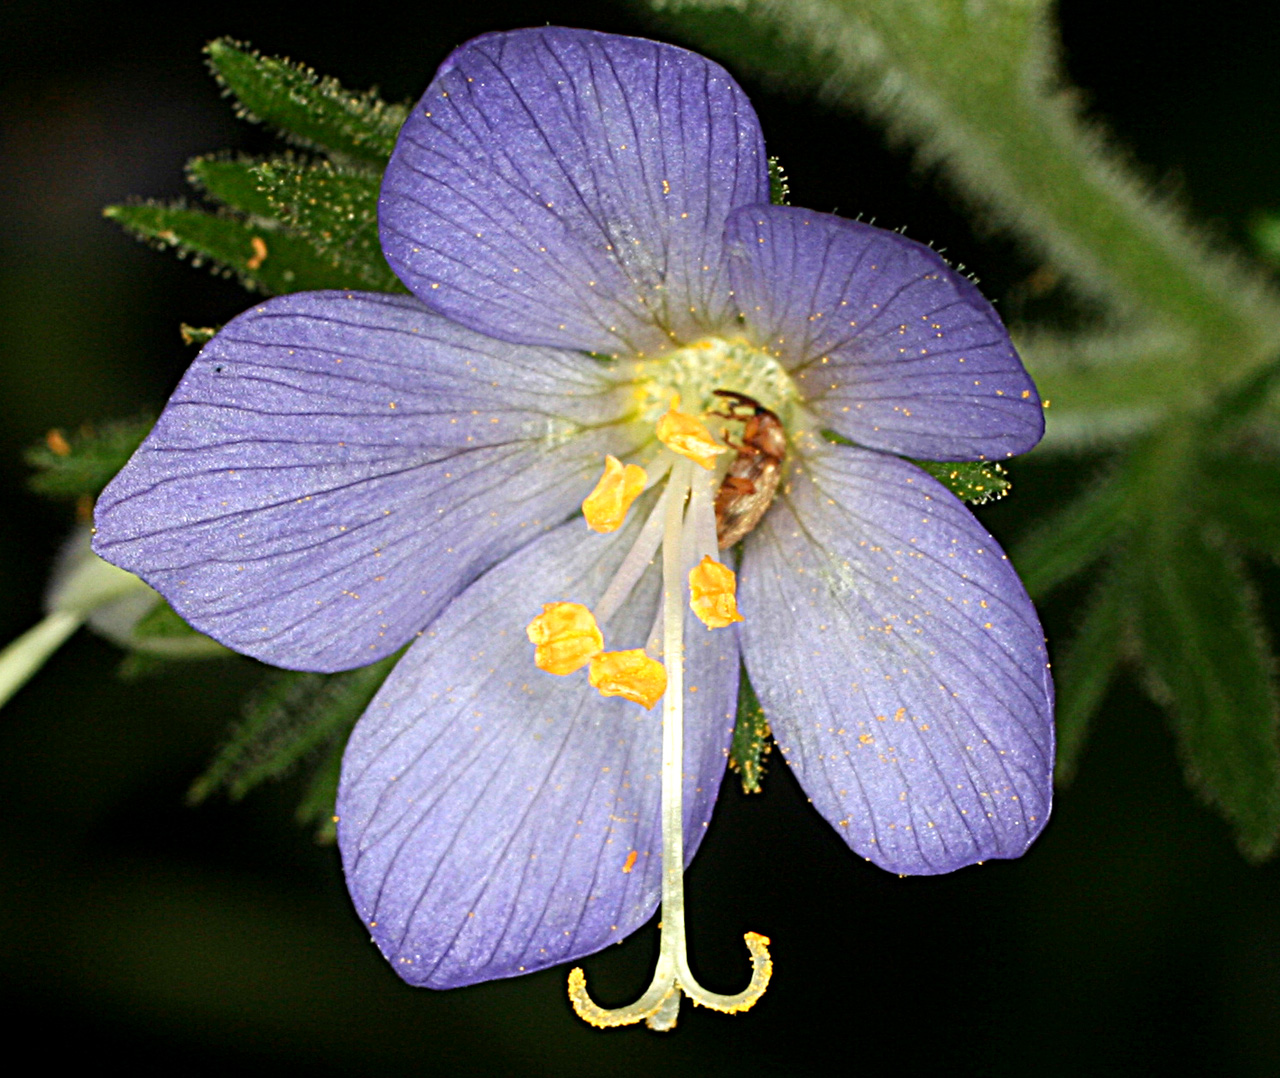 Close-up of flower showing five purple petals, pollen-covered stamens and a protruding style